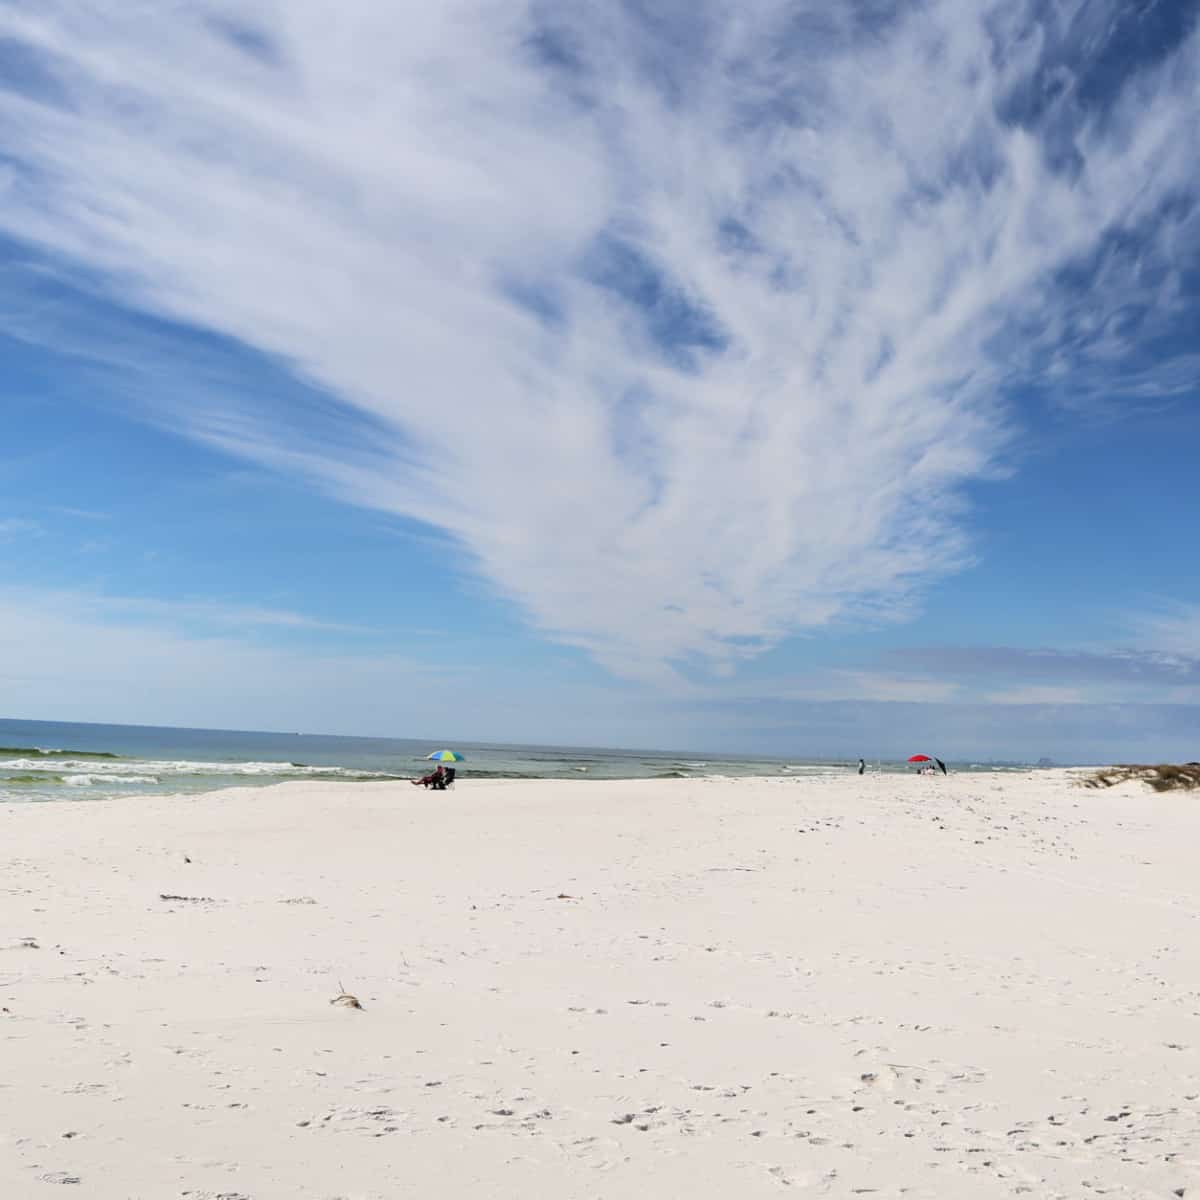 Gulf Islands National Seashore has beautiful white sand beaches in Florida and Mississippi